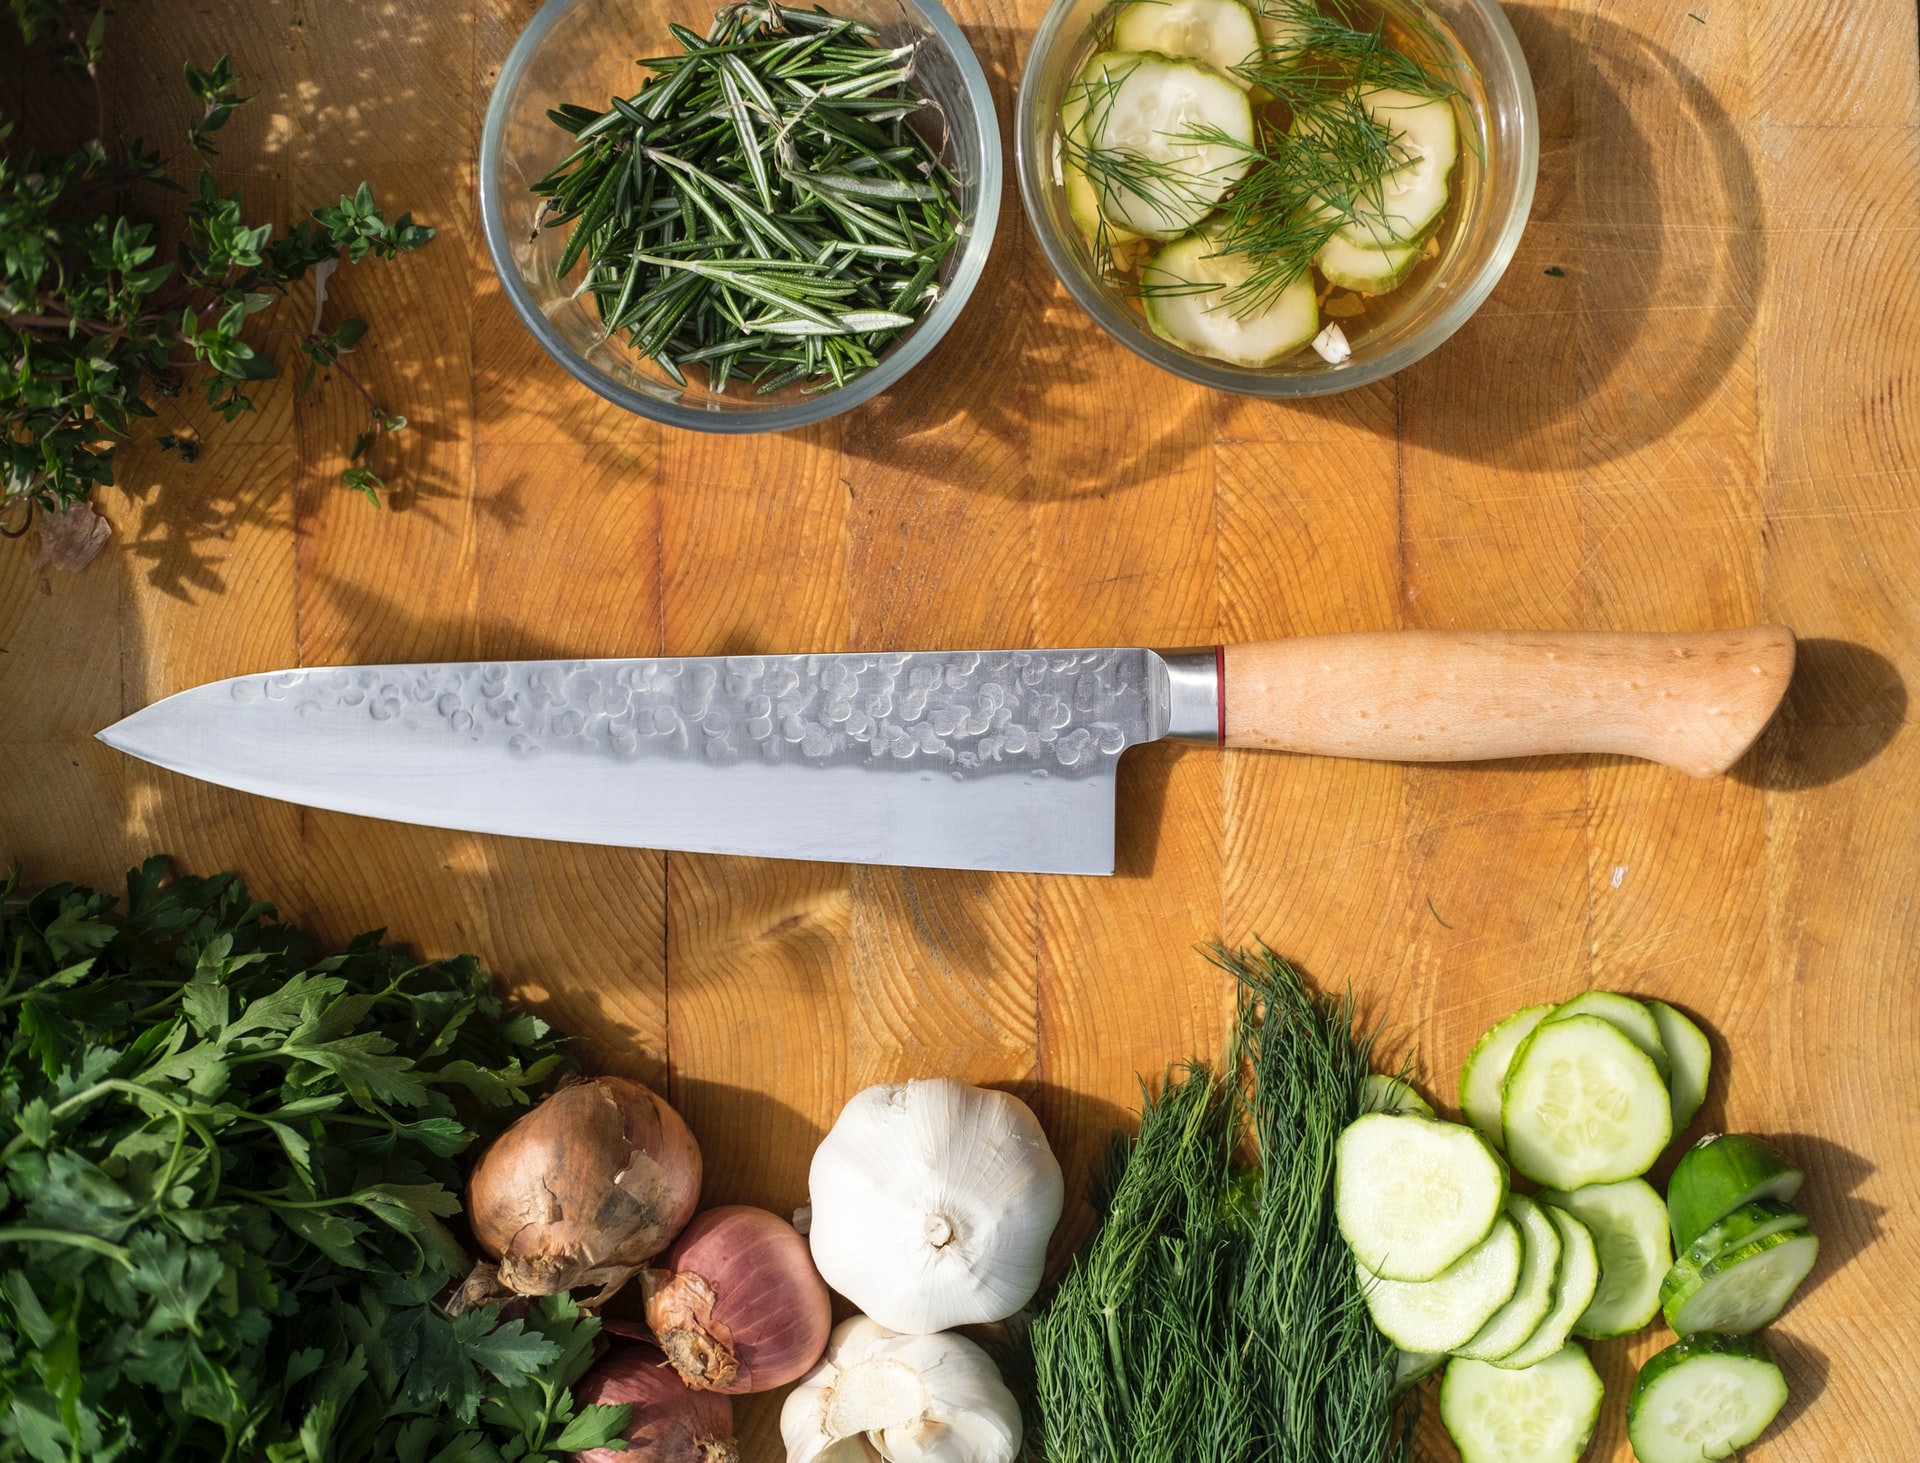 Kitchen knife on a cutting board with herbs, onions, and garlic